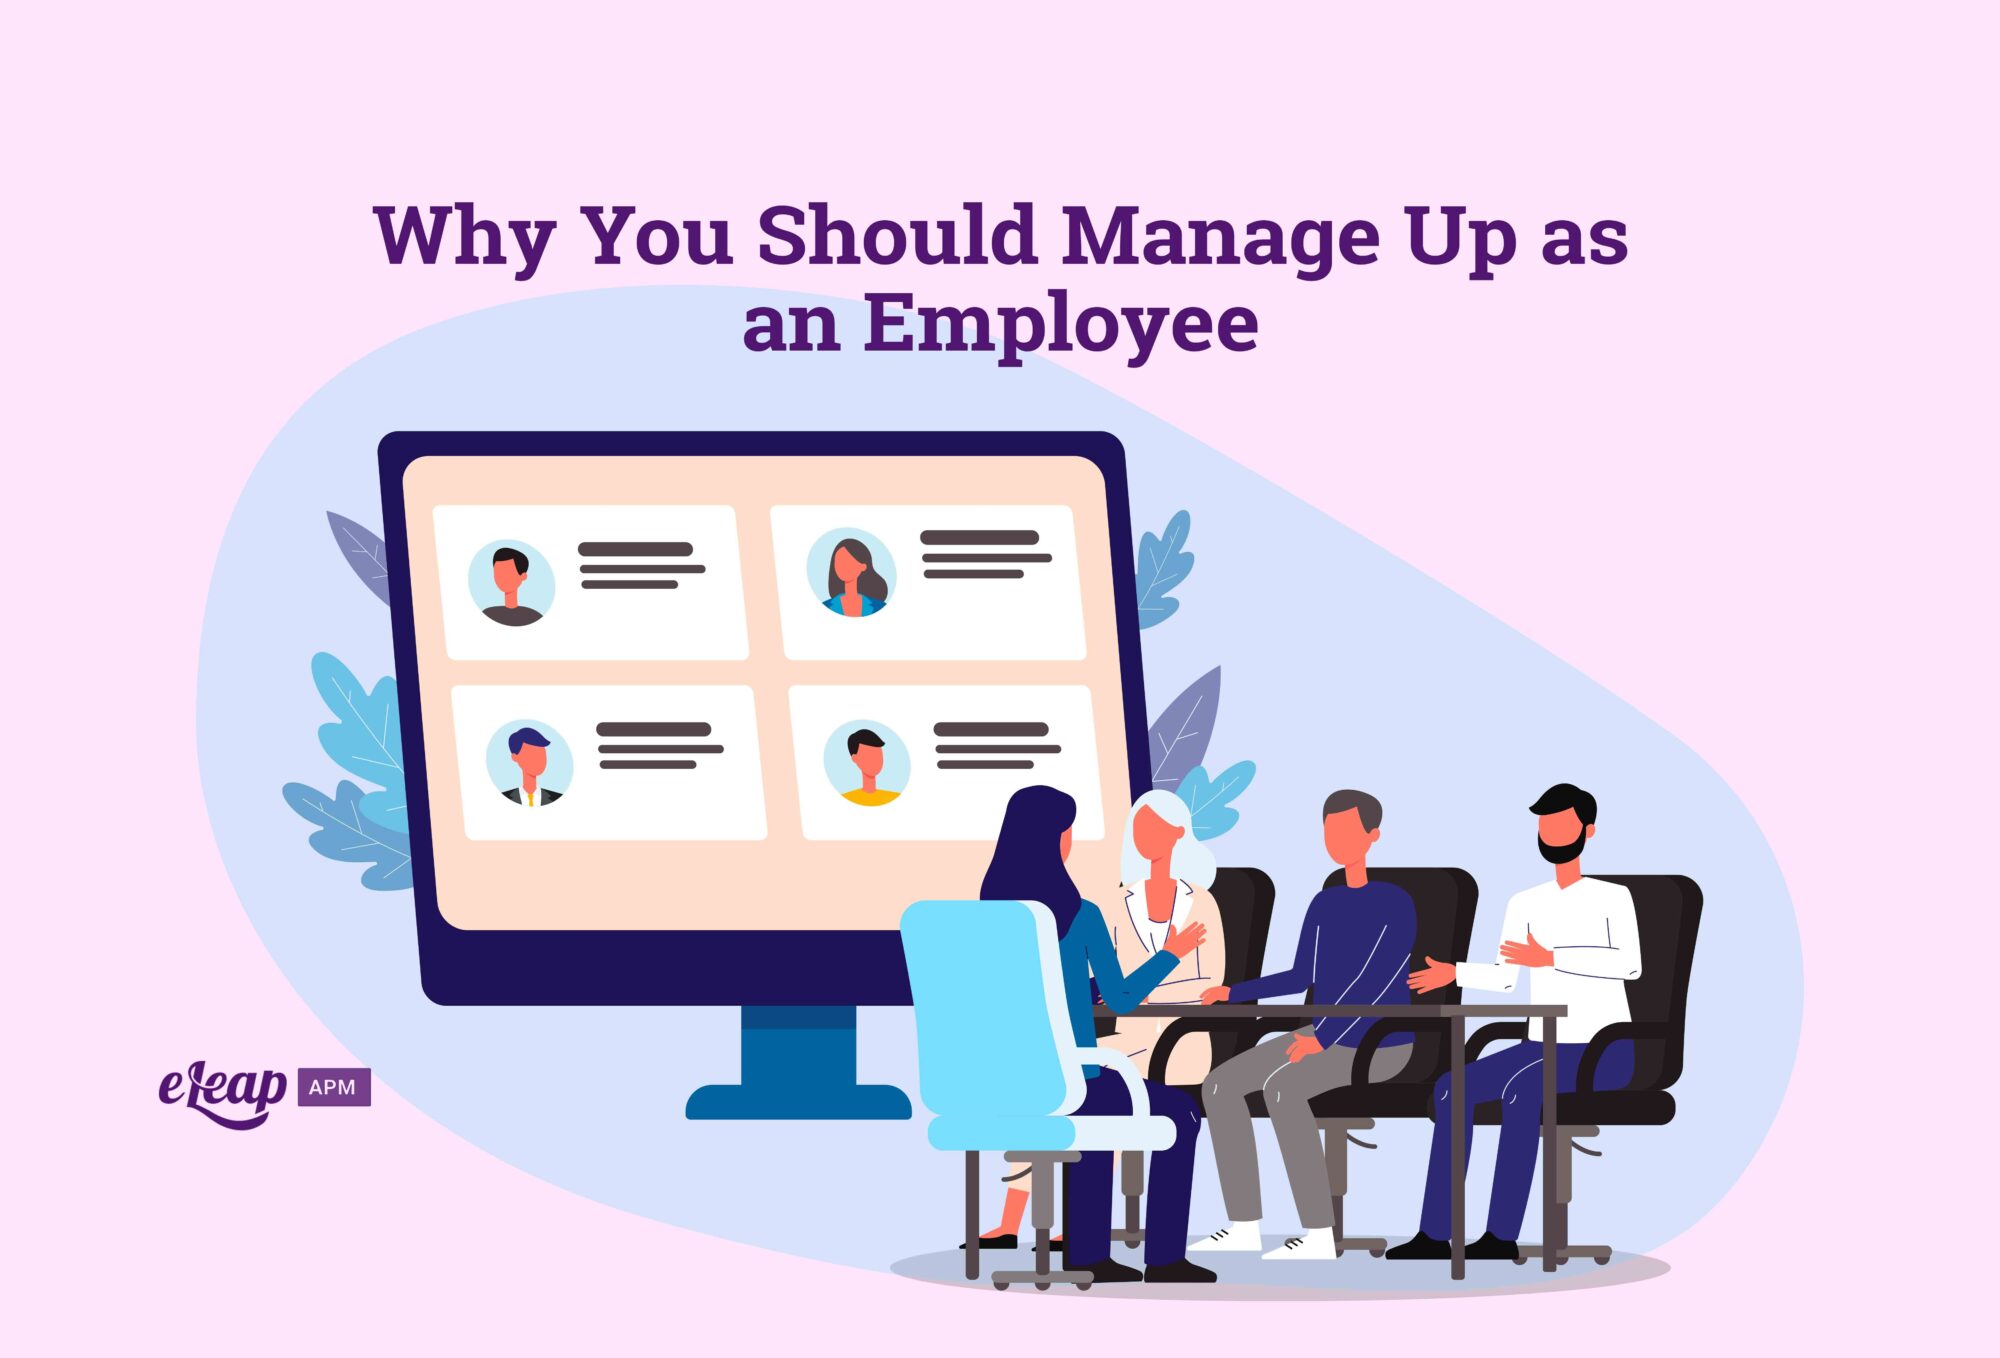 Why You Should Manage Up as an Employee